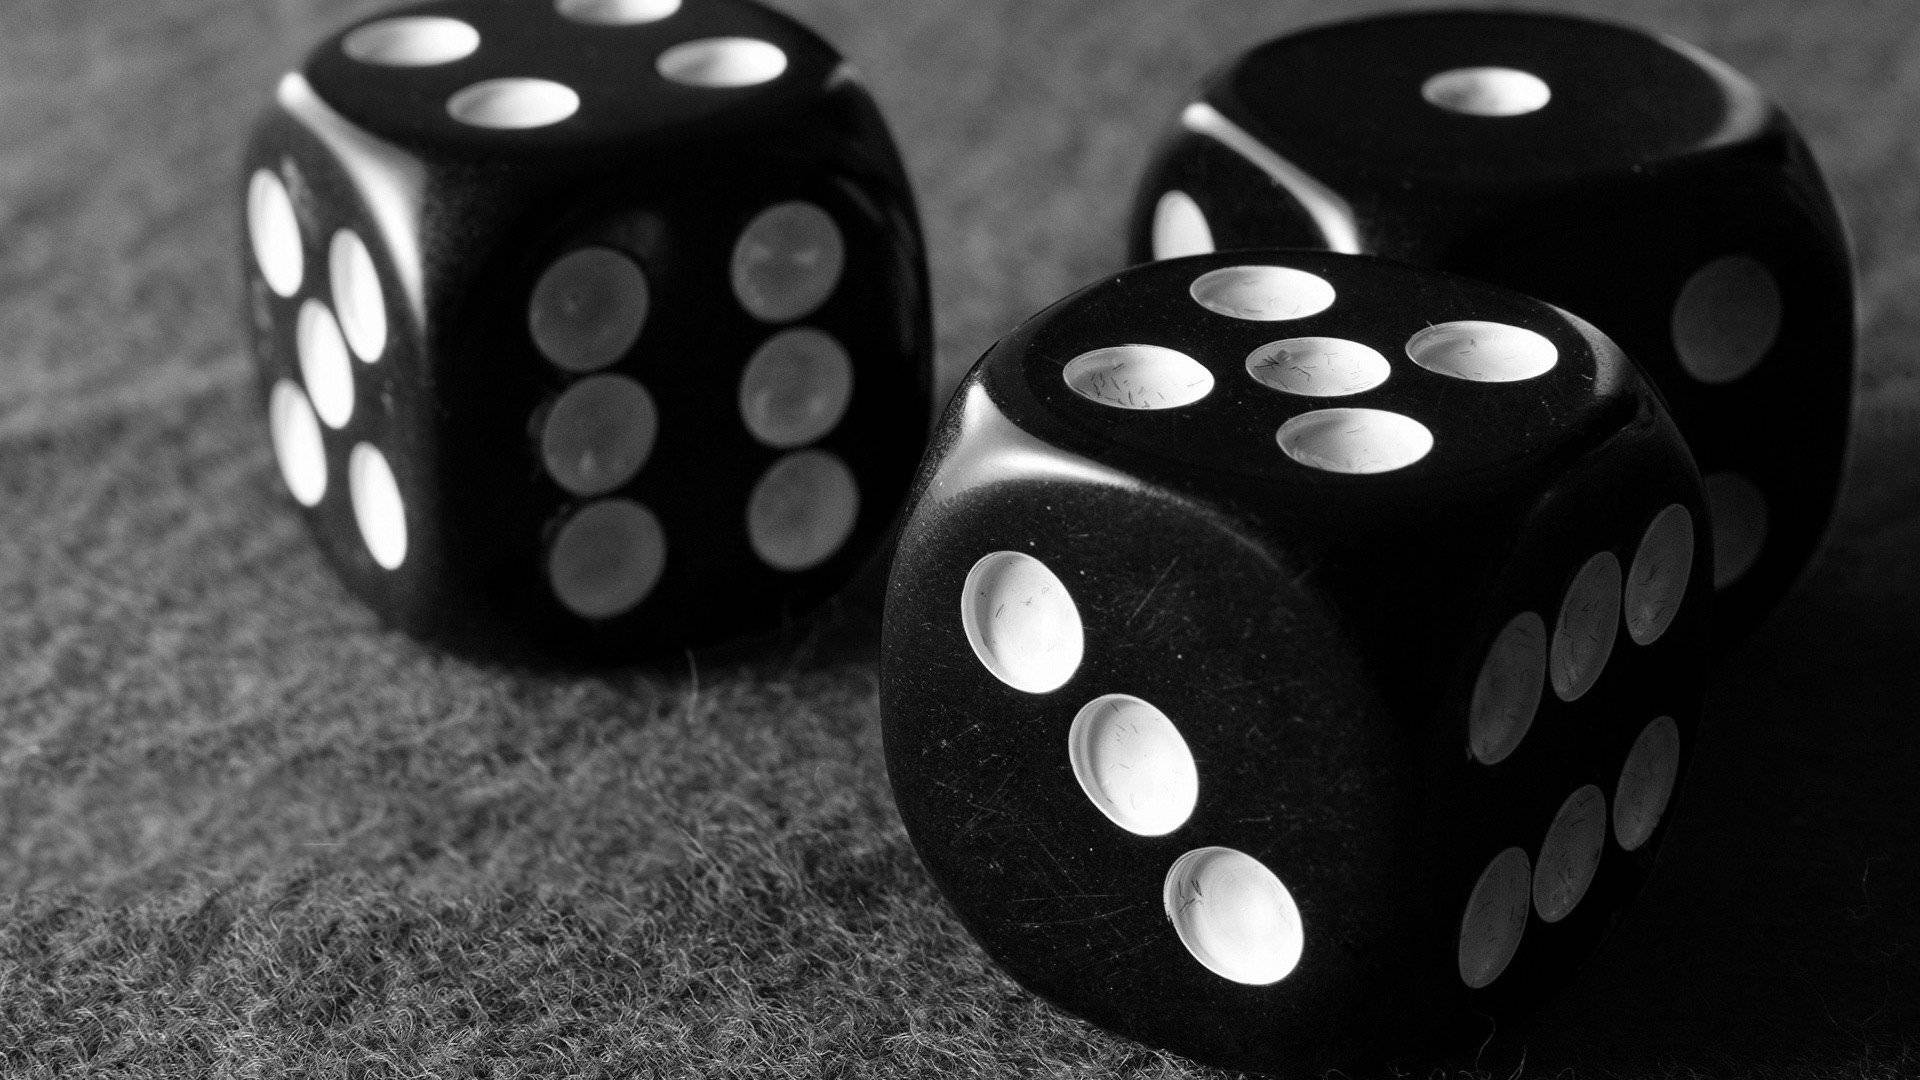 Blank And White Black Dice Wallpaper